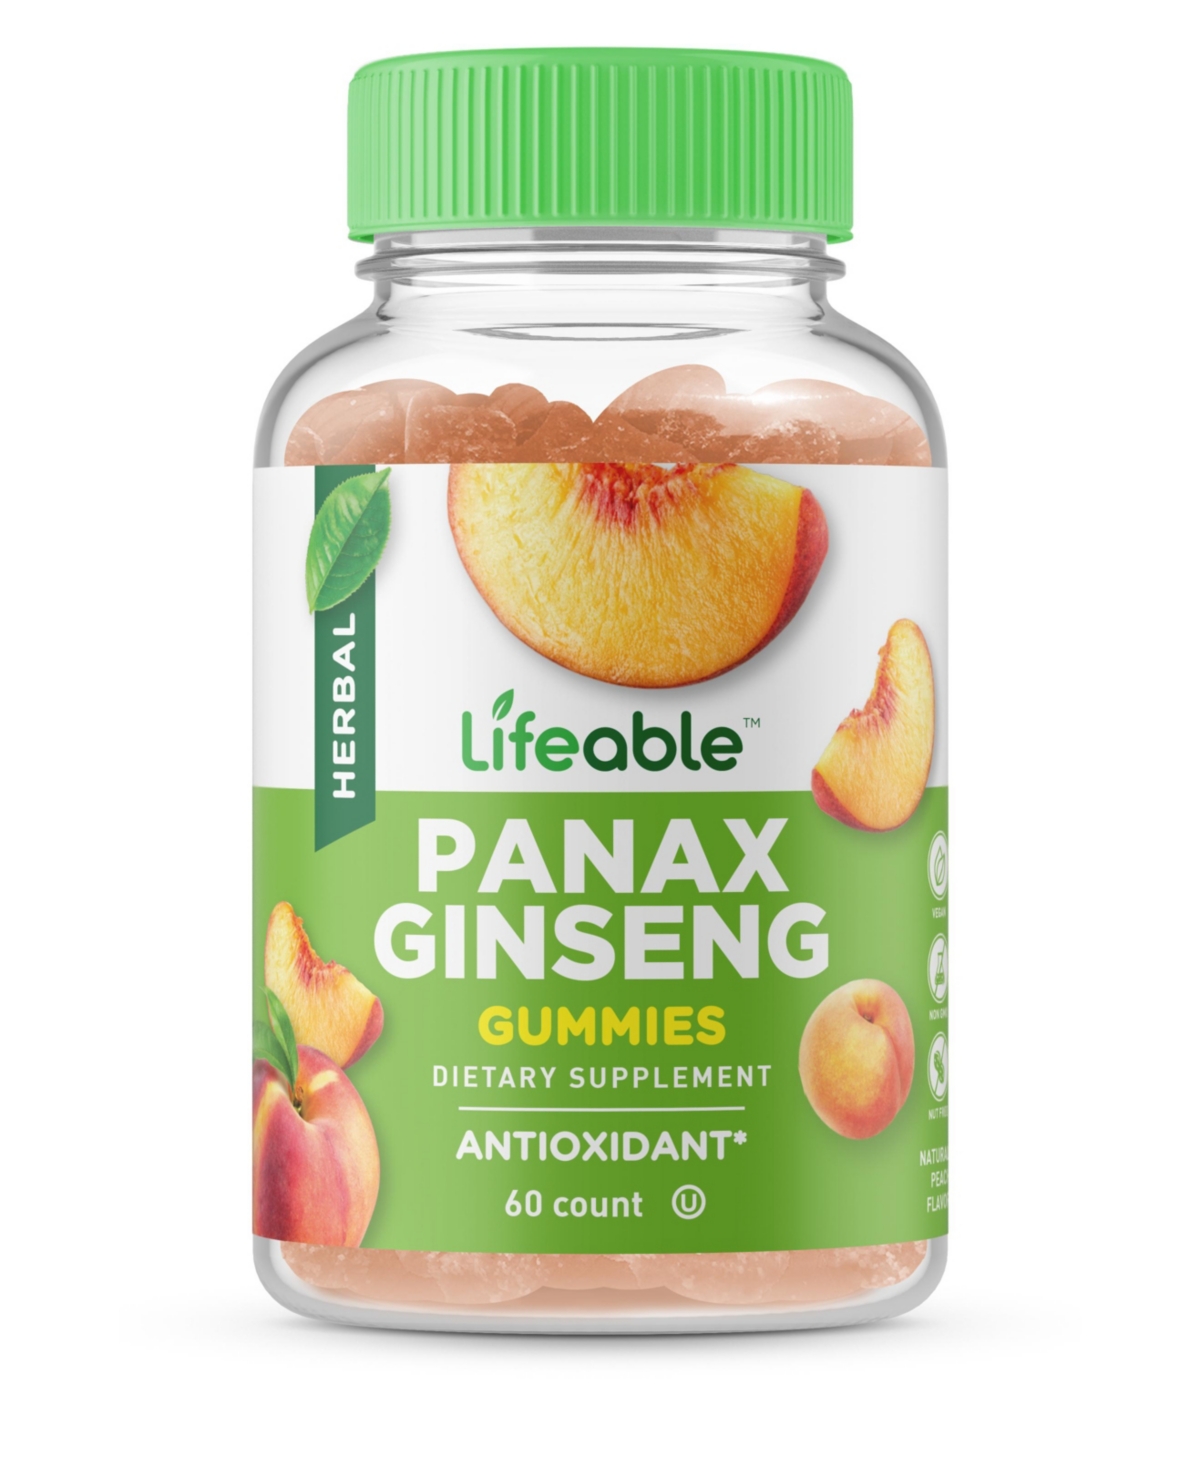 Panax Ginseng Root Extract Gummies - Antioxidant Support - Great Tasting Natural Flavor, Herbal Supplement Vitamins - 60 Gummies - Open Misce